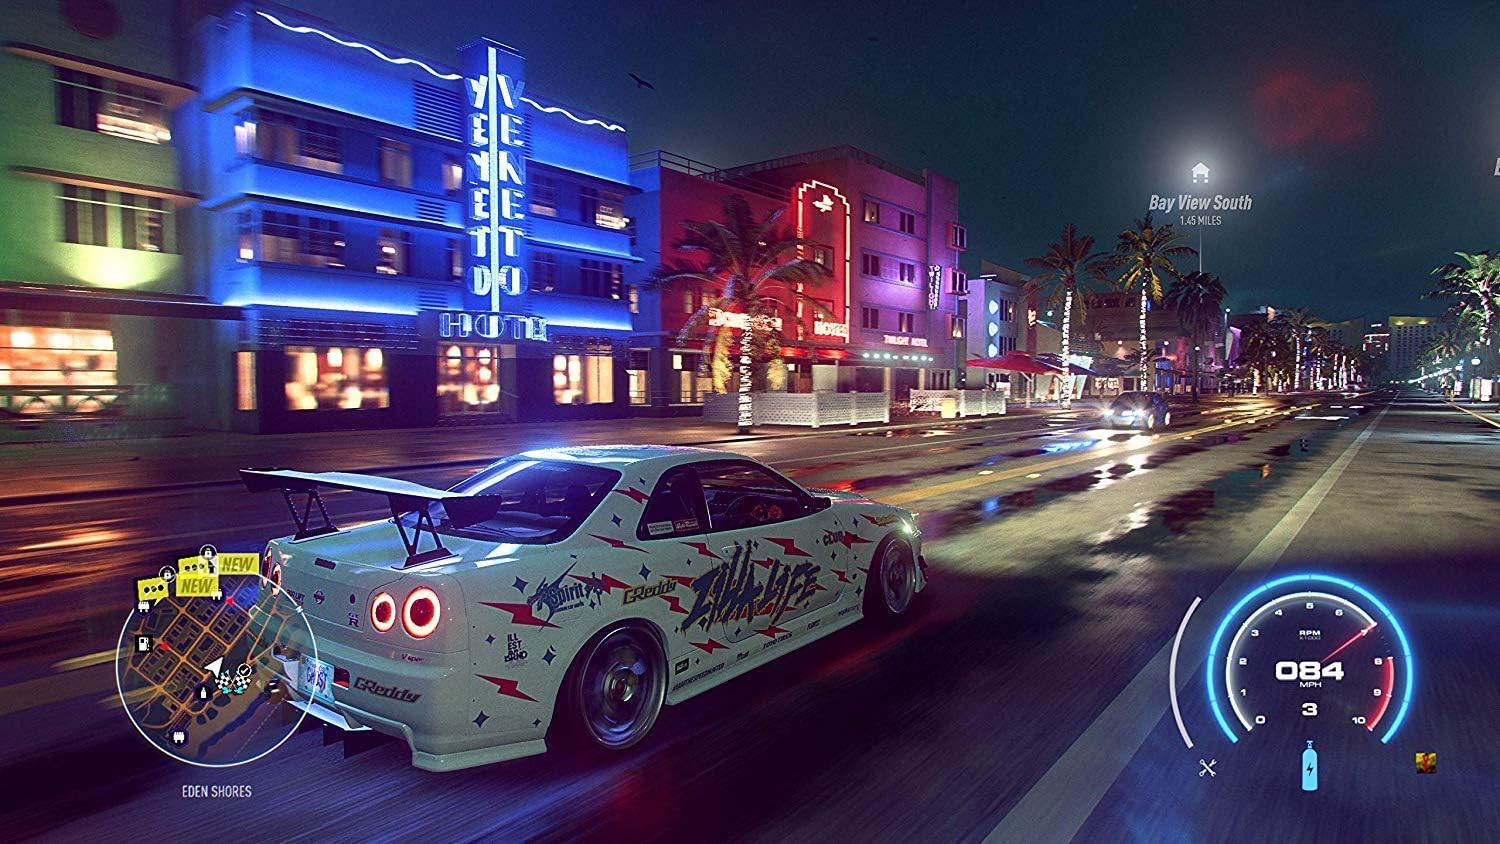 PS4 Need for Speed Heat Video Game Software (US)